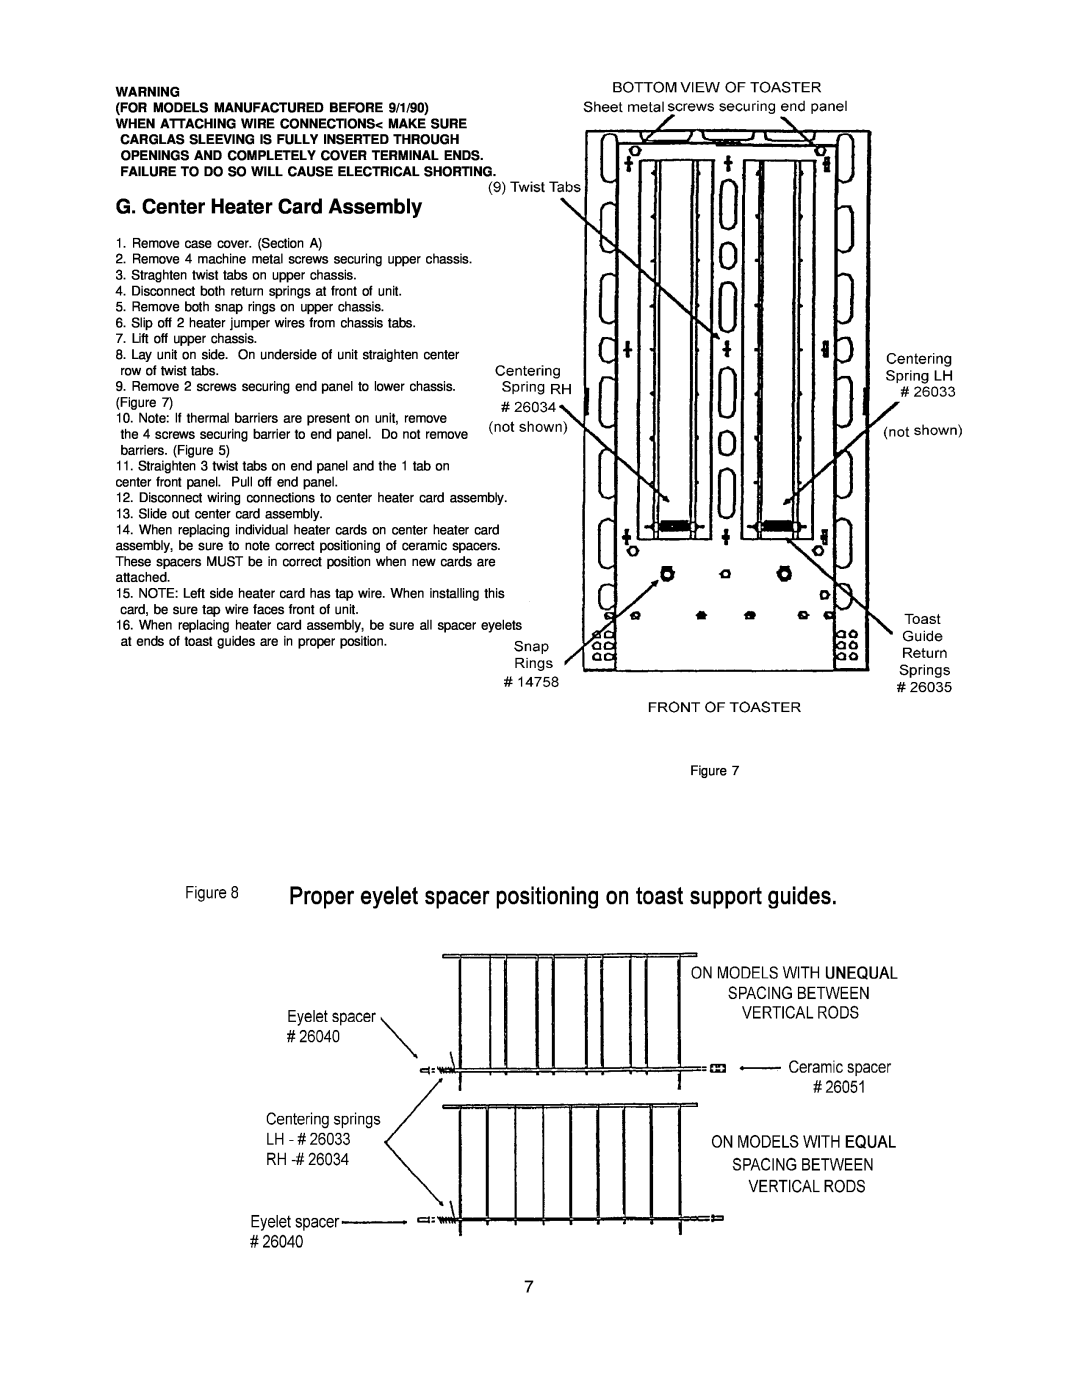 Merco Savory POP-2/4 service manual G. Center Heater Card Assembly, FOR MODELS MANUFACTURED BEFORE 9/1/90 